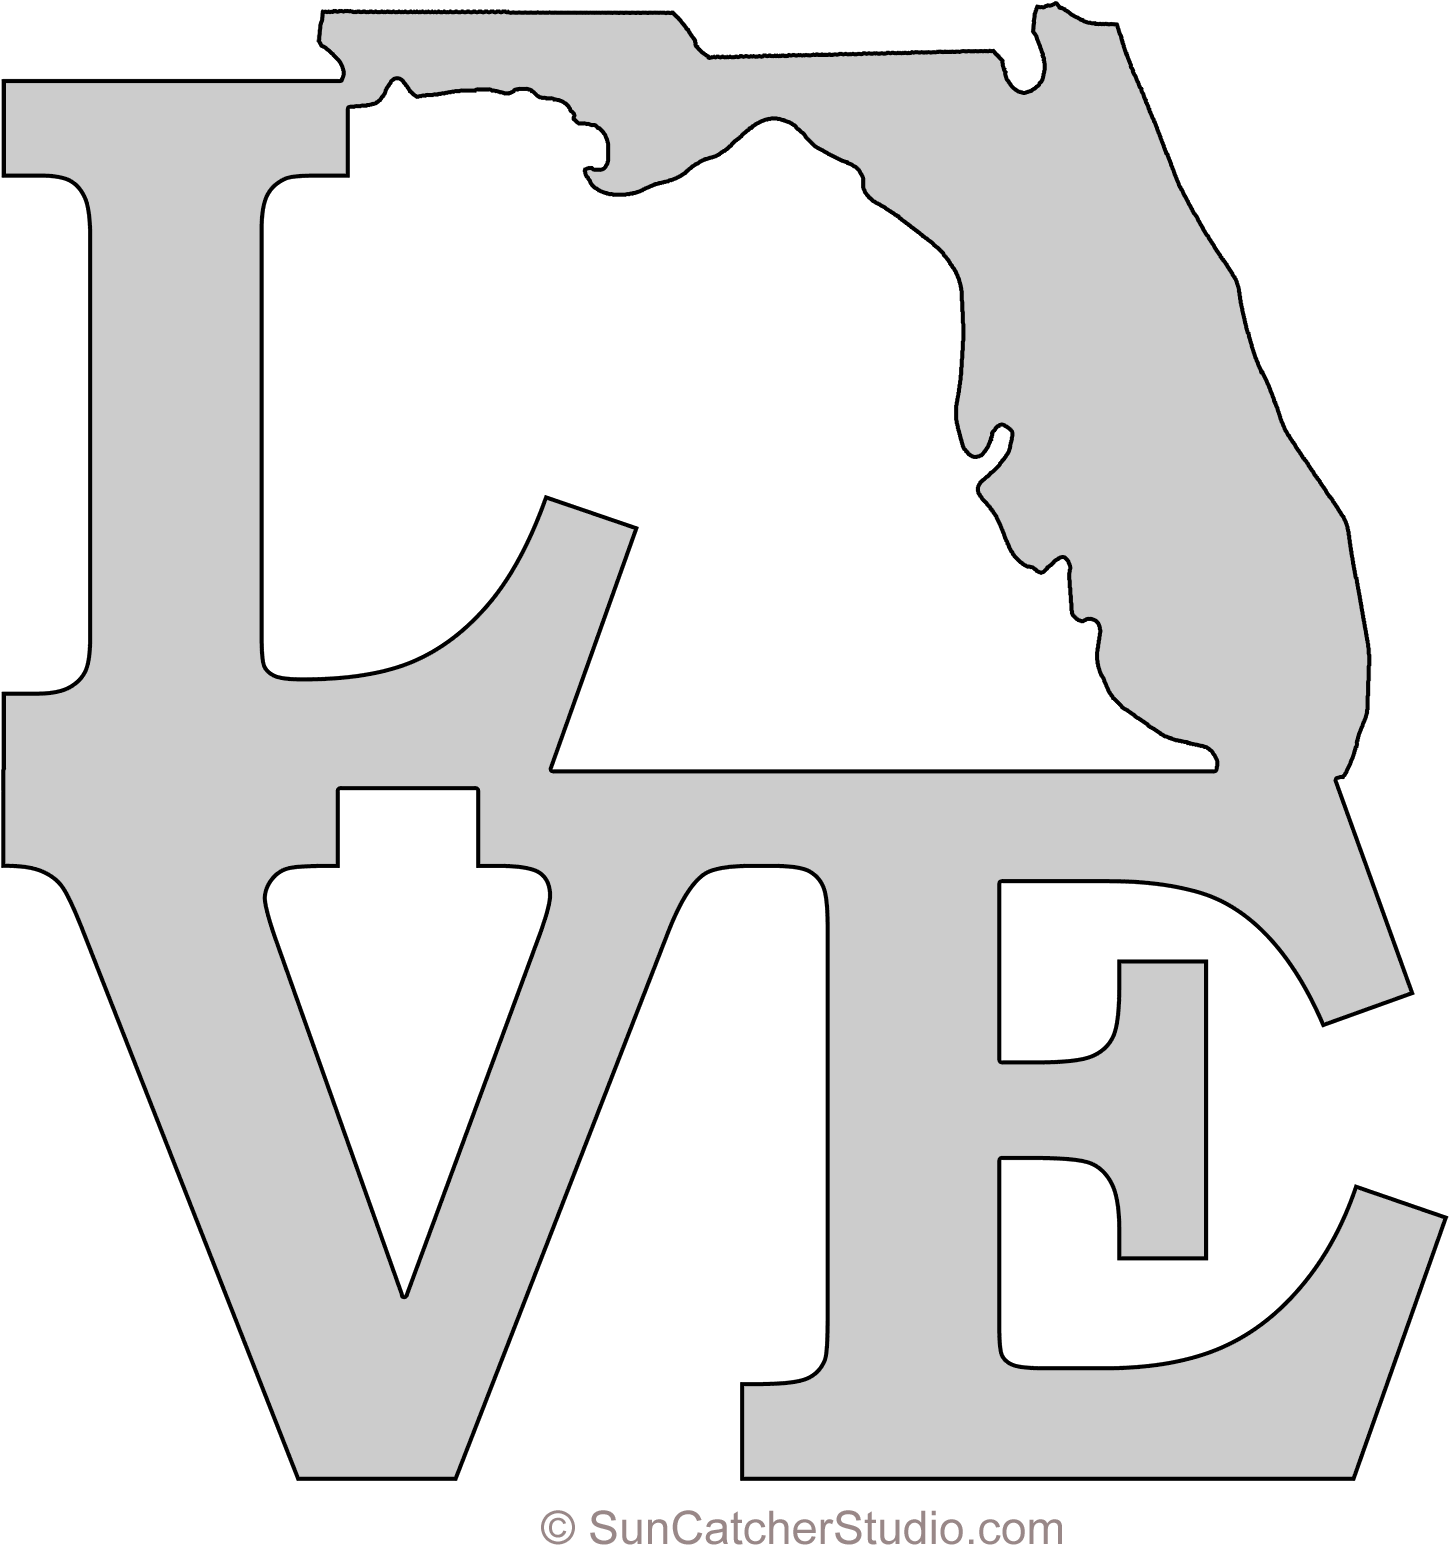 Florida Love Map Outline Scroll Saw Pattern Shape